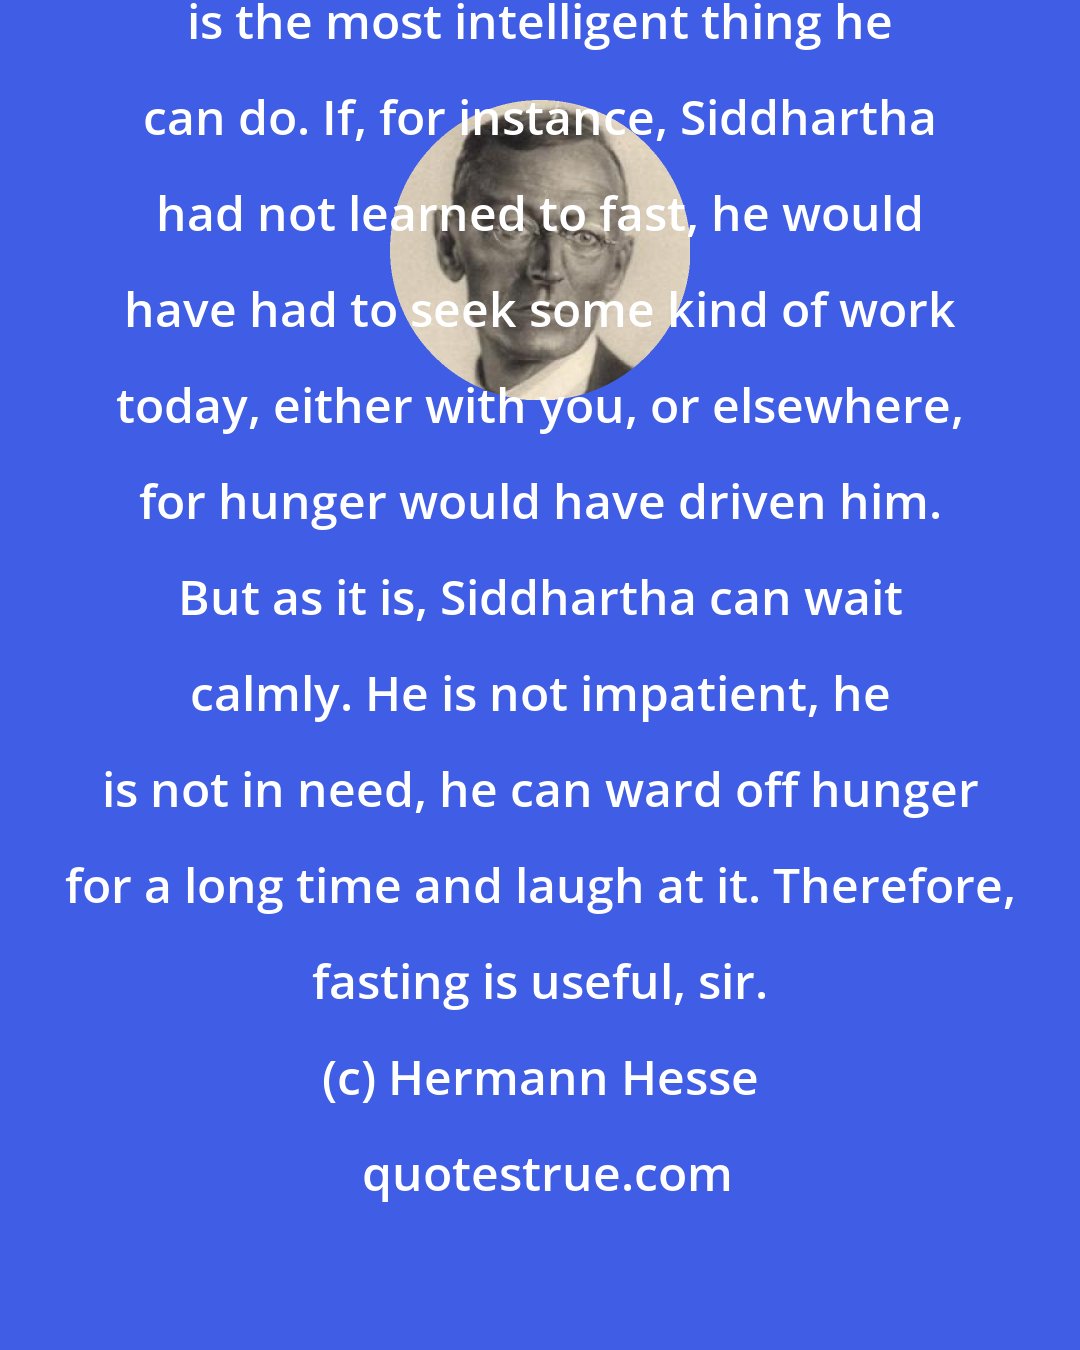 Hermann Hesse: If man has nothing to eat, fasting is the most intelligent thing he can do. If, for instance, Siddhartha had not learned to fast, he would have had to seek some kind of work today, either with you, or elsewhere, for hunger would have driven him. But as it is, Siddhartha can wait calmly. He is not impatient, he is not in need, he can ward off hunger for a long time and laugh at it. Therefore, fasting is useful, sir.